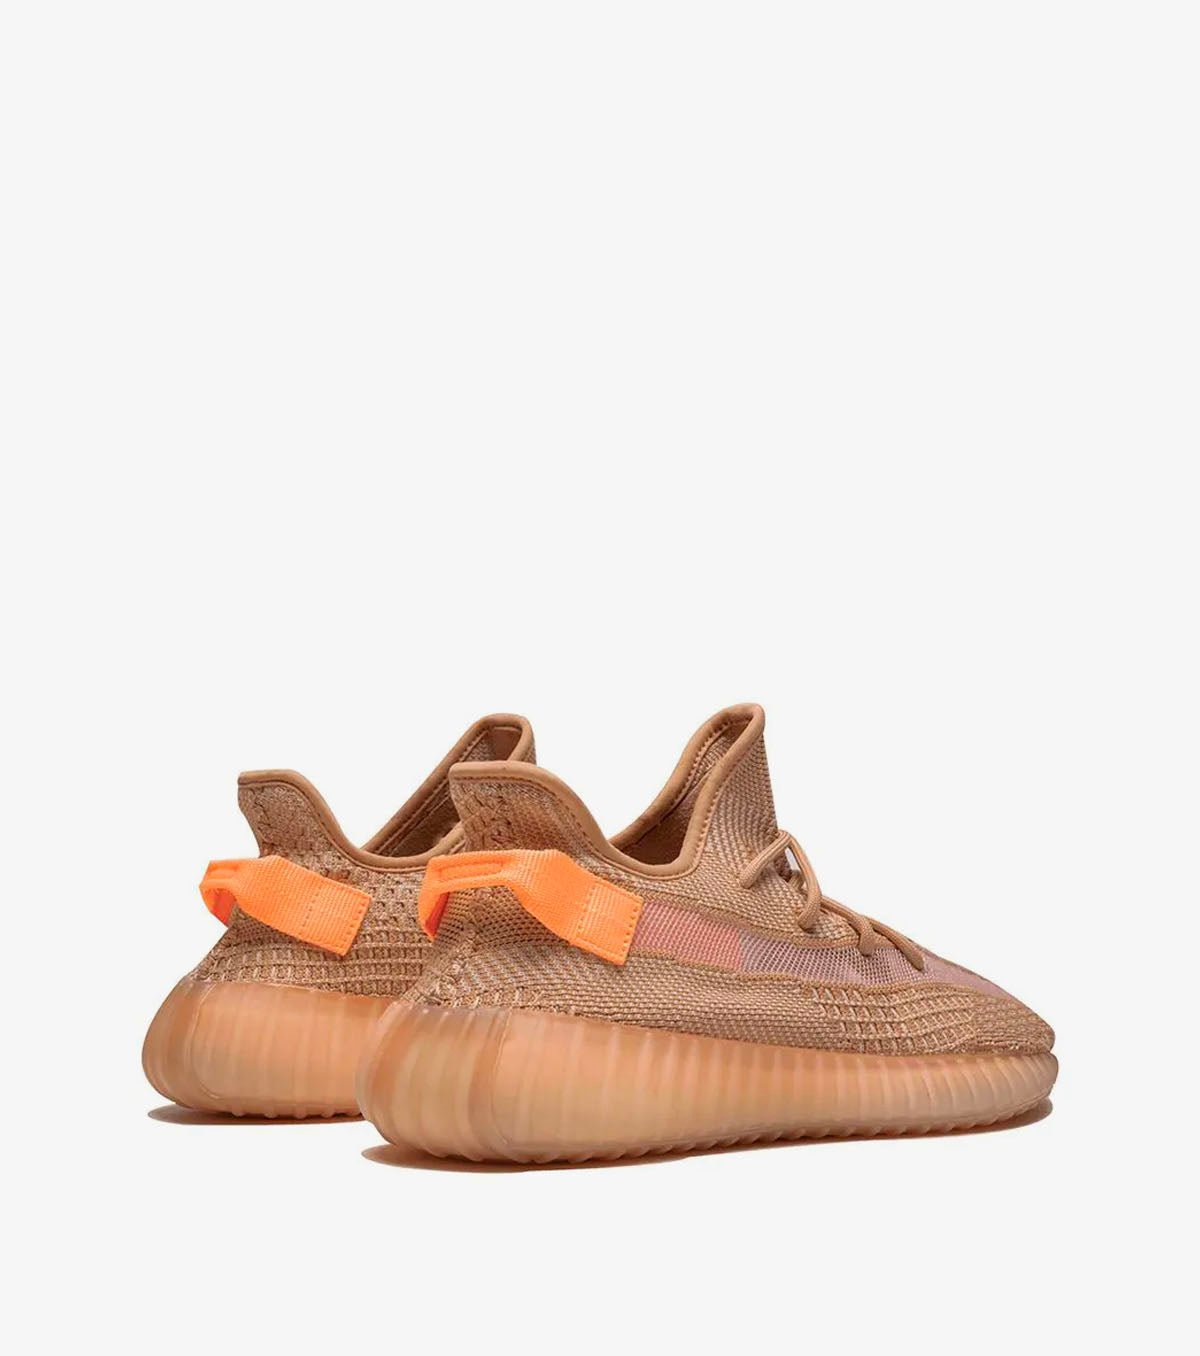 Yeezy Boost 350 V2 "Clay" - SNKRBASE